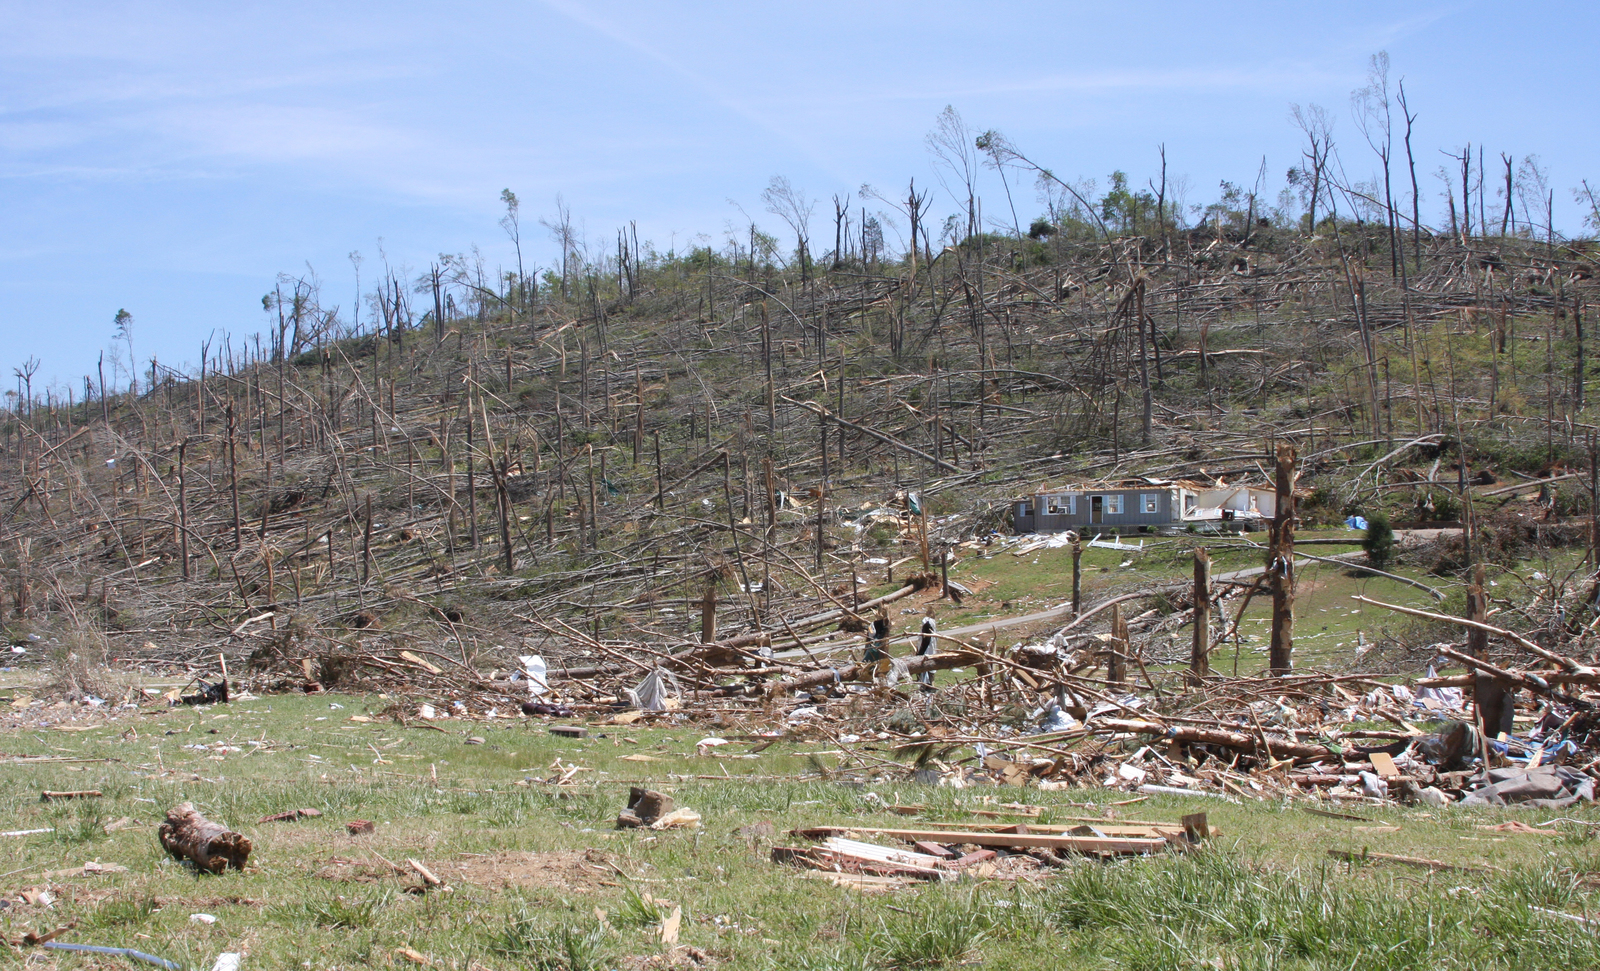 Tornado Ringgold Ga May 5 11 A Scorched Hillside And What S Left Of A House In Catoosa County After A Tornado Swept Through On April 27 11 President Obama